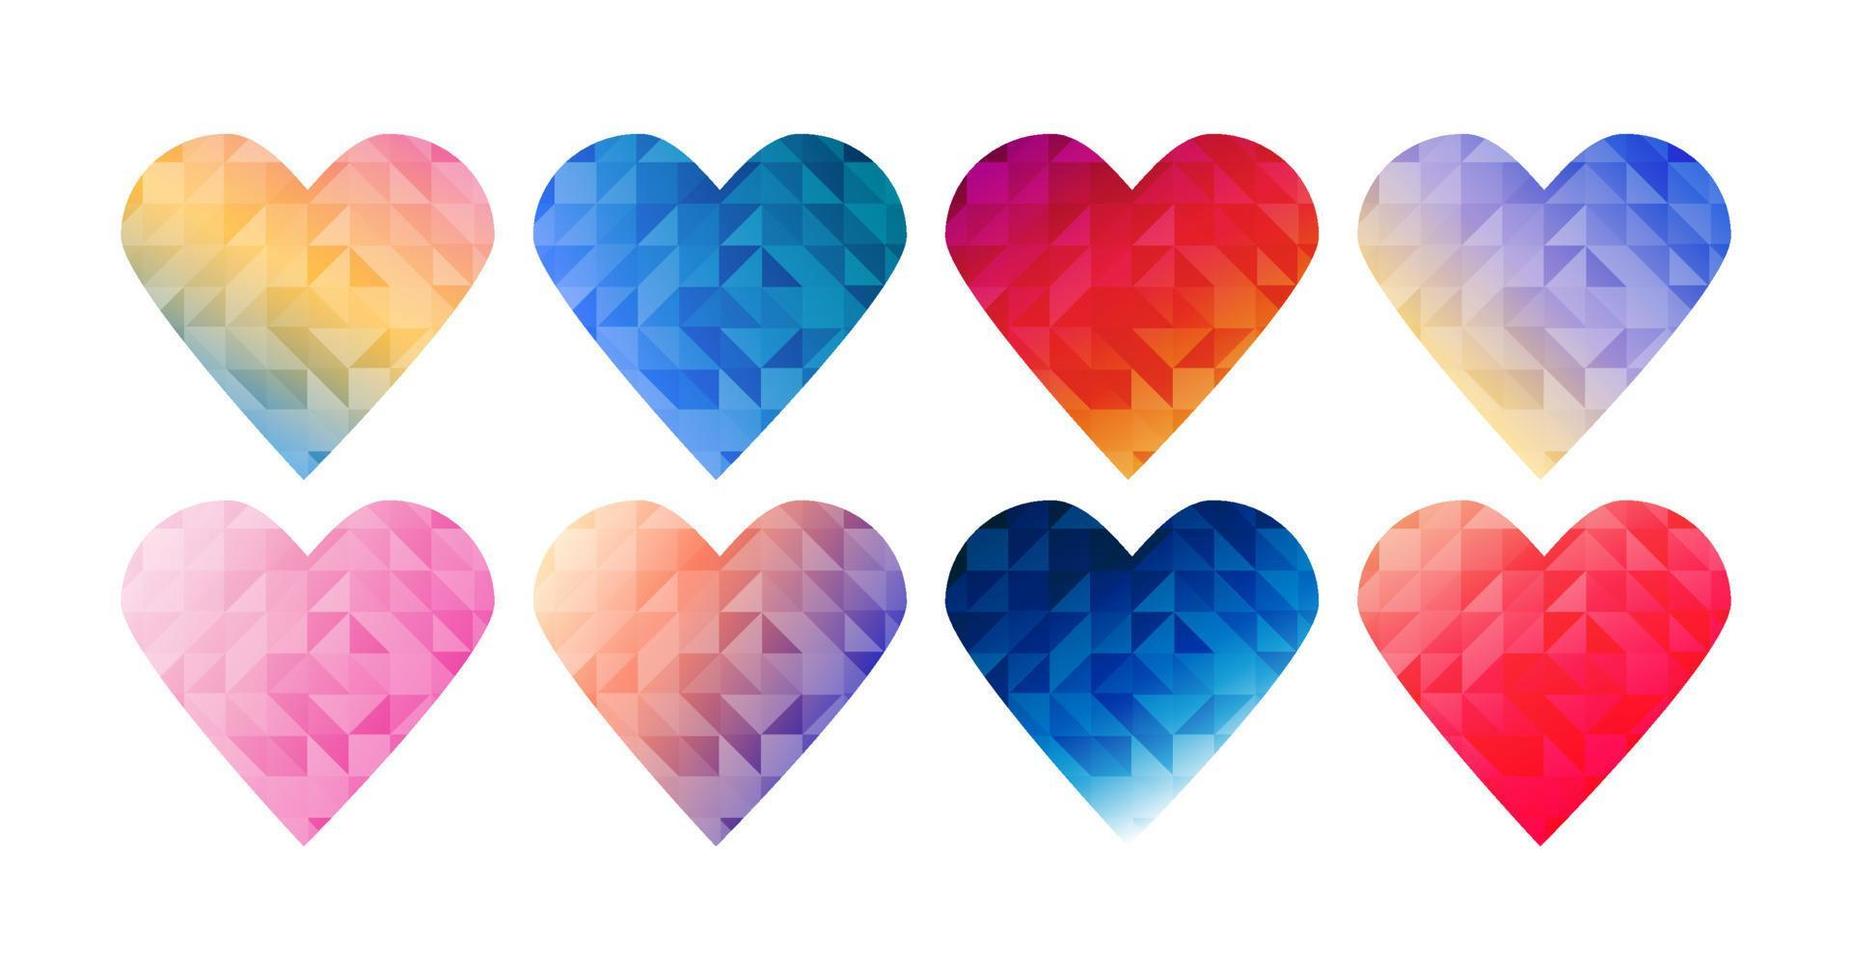 hearts collection low poly mosaic triangle style valentine's day elements vector